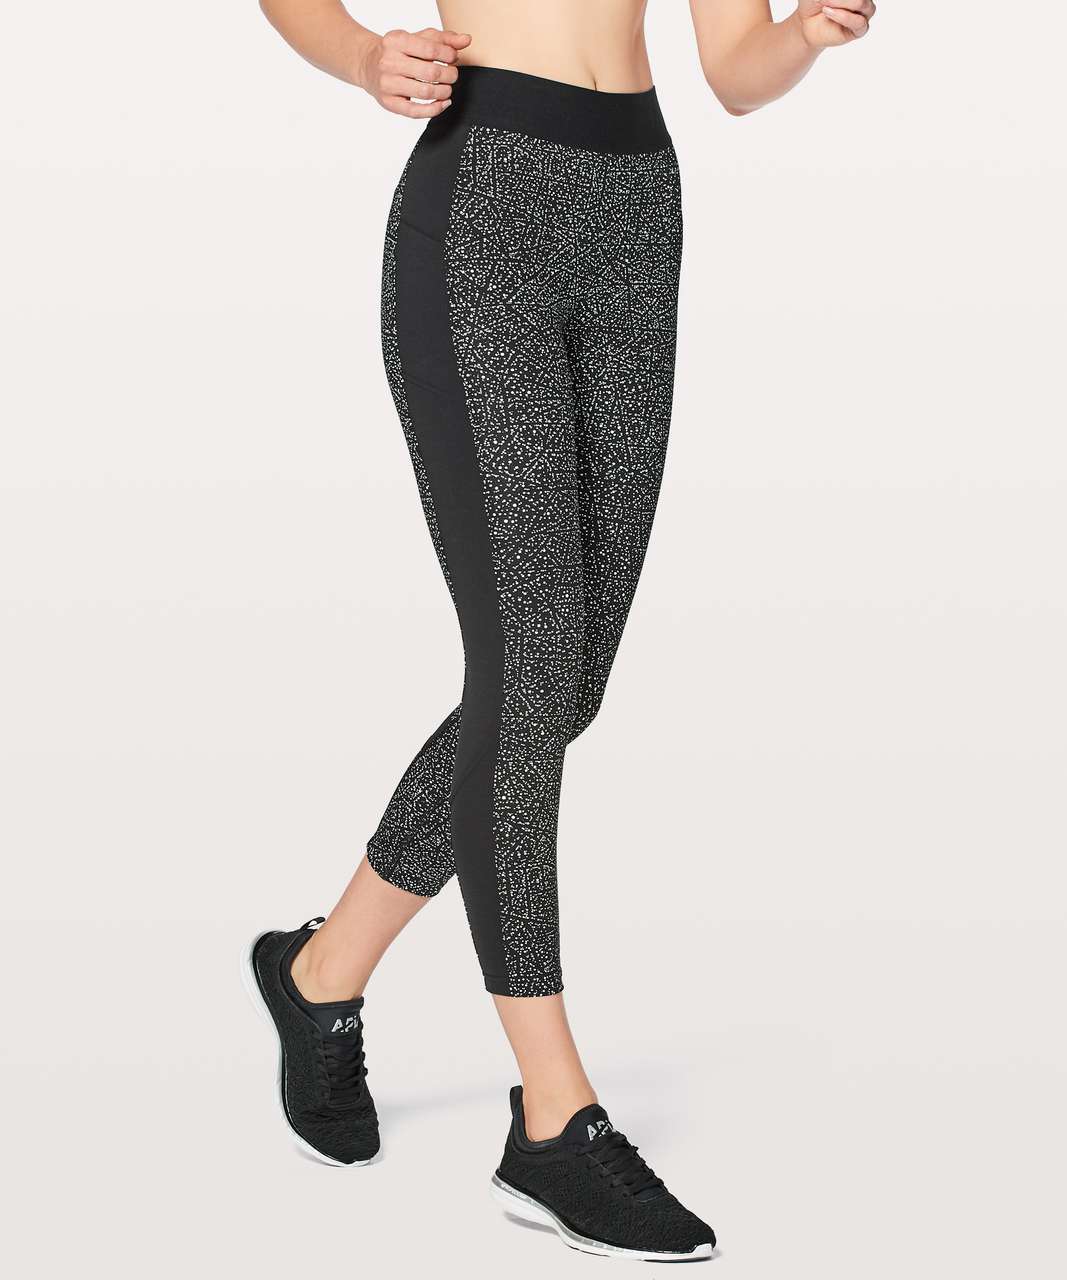 LULULEMON BOX IT OUT POCKET GRAY/BLACK LEGGINGS SIZE 6– WEARHOUSE  CONSIGNMENT